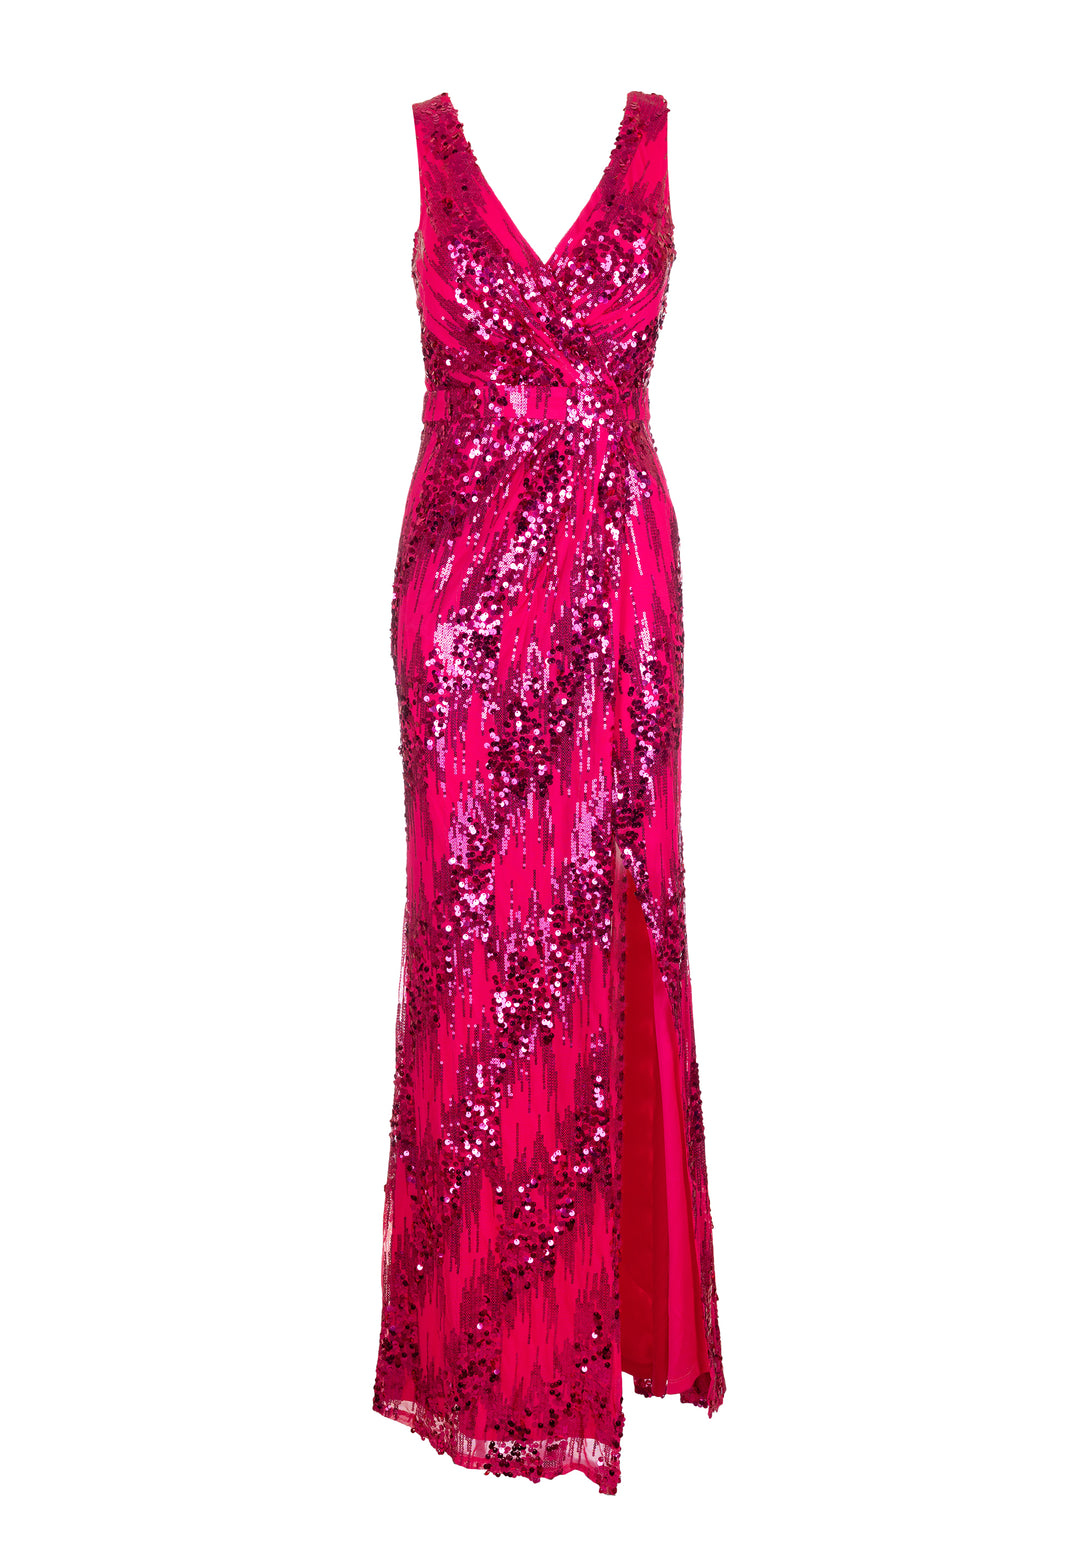 Long dress slim fit made in sequins